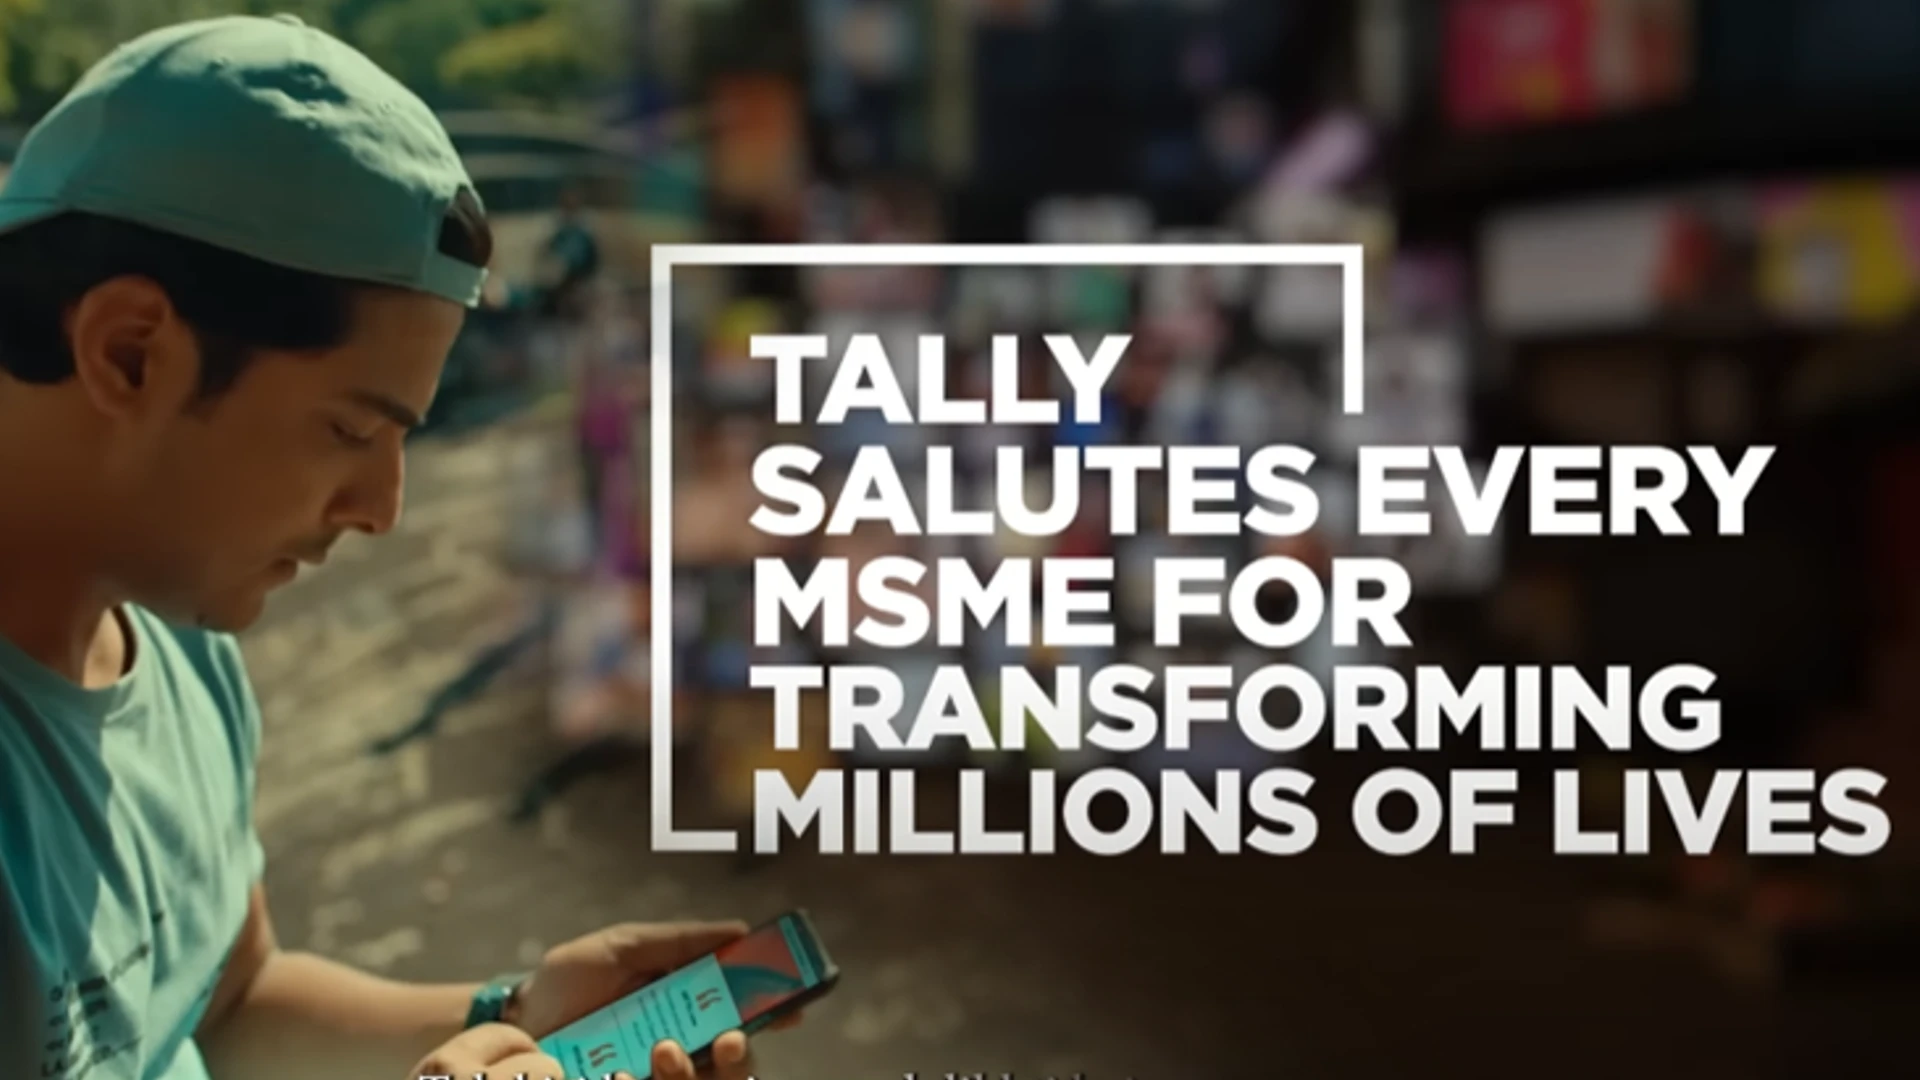 Tally Solutions Recognizes The True Spirit Of MSMEs In Their Latest Campaign